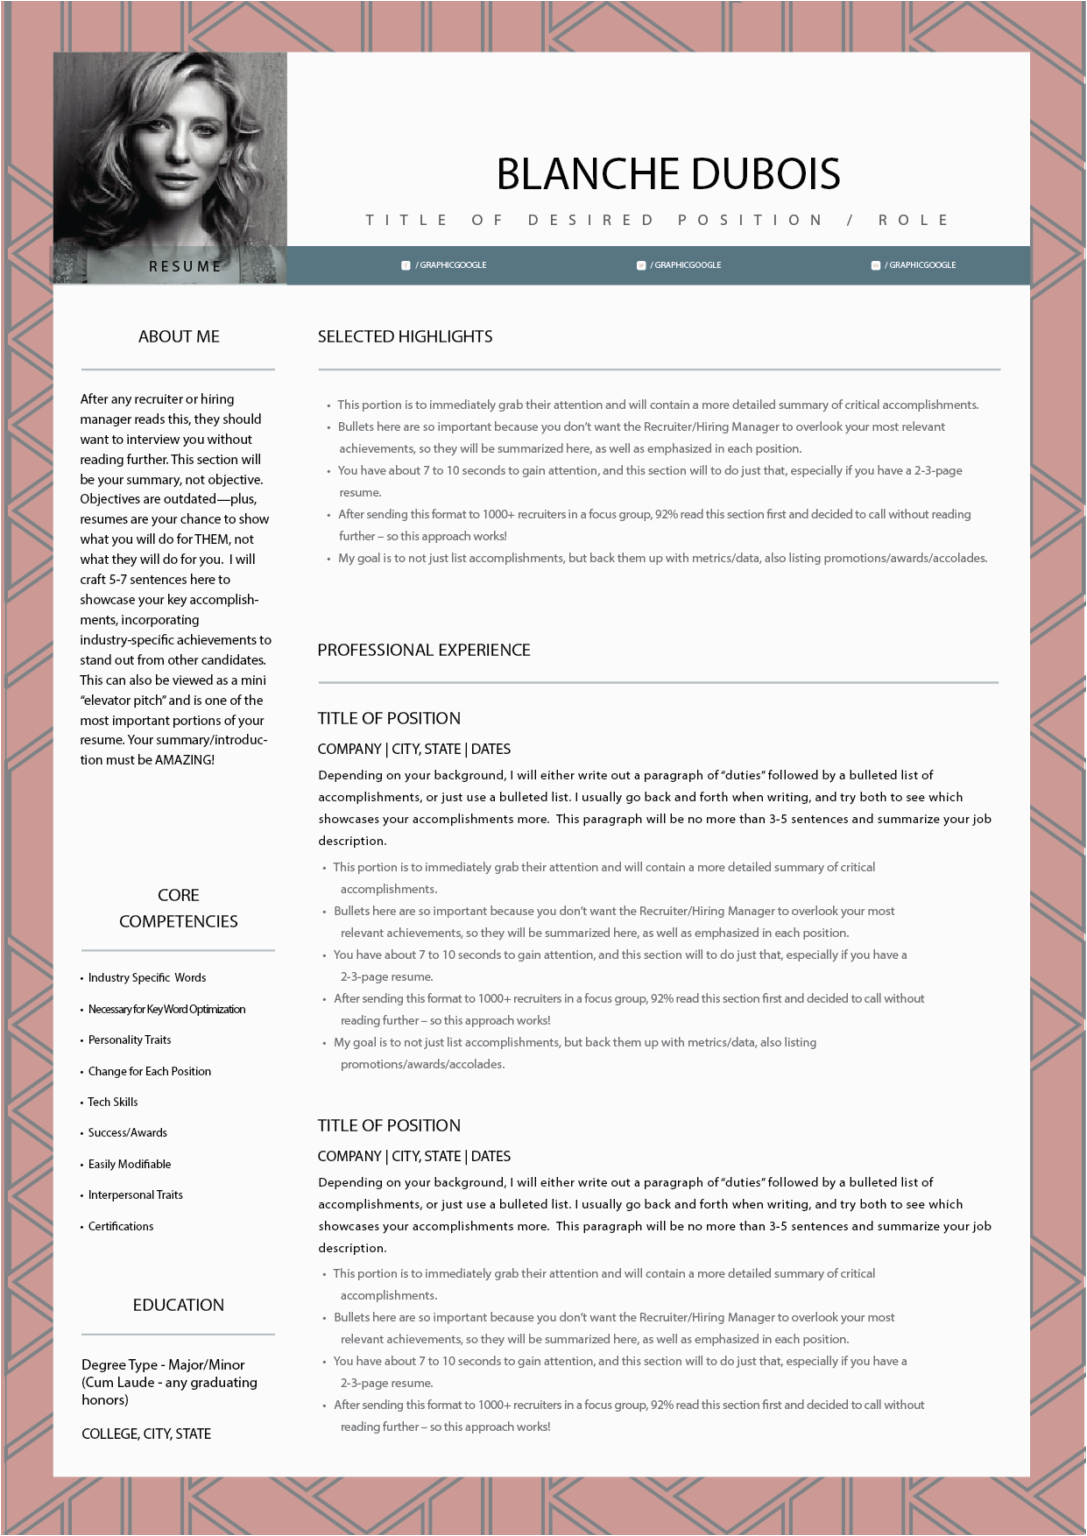 Sample Resumes for Graphic Design Recent Graduate Graphical Resume My Improved Resume